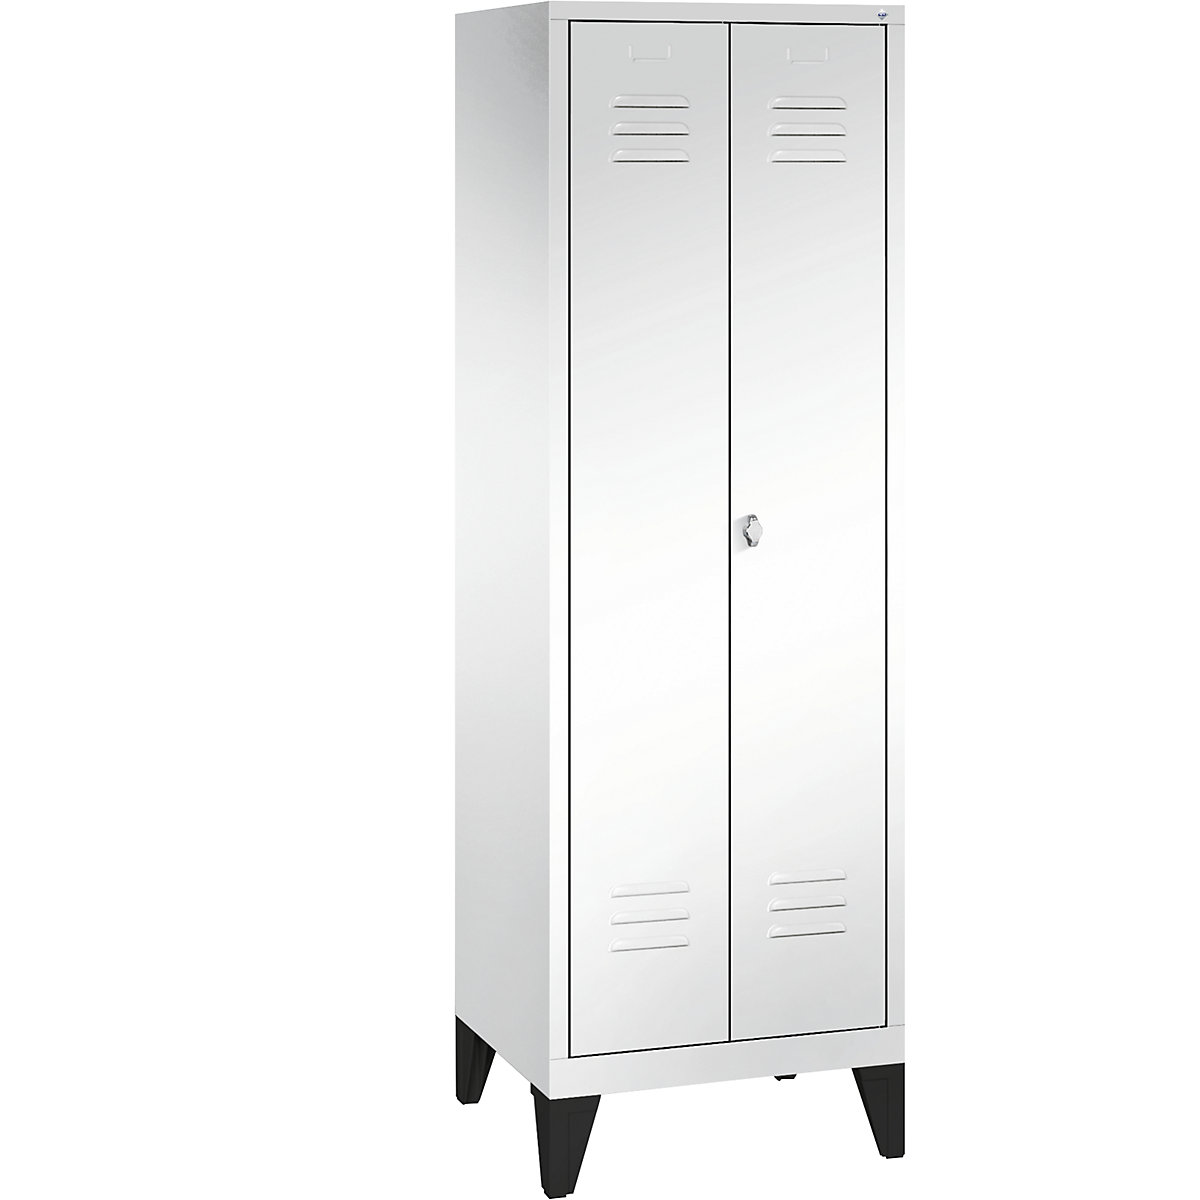 CLASSIC equipment cupboard with feet – C+P